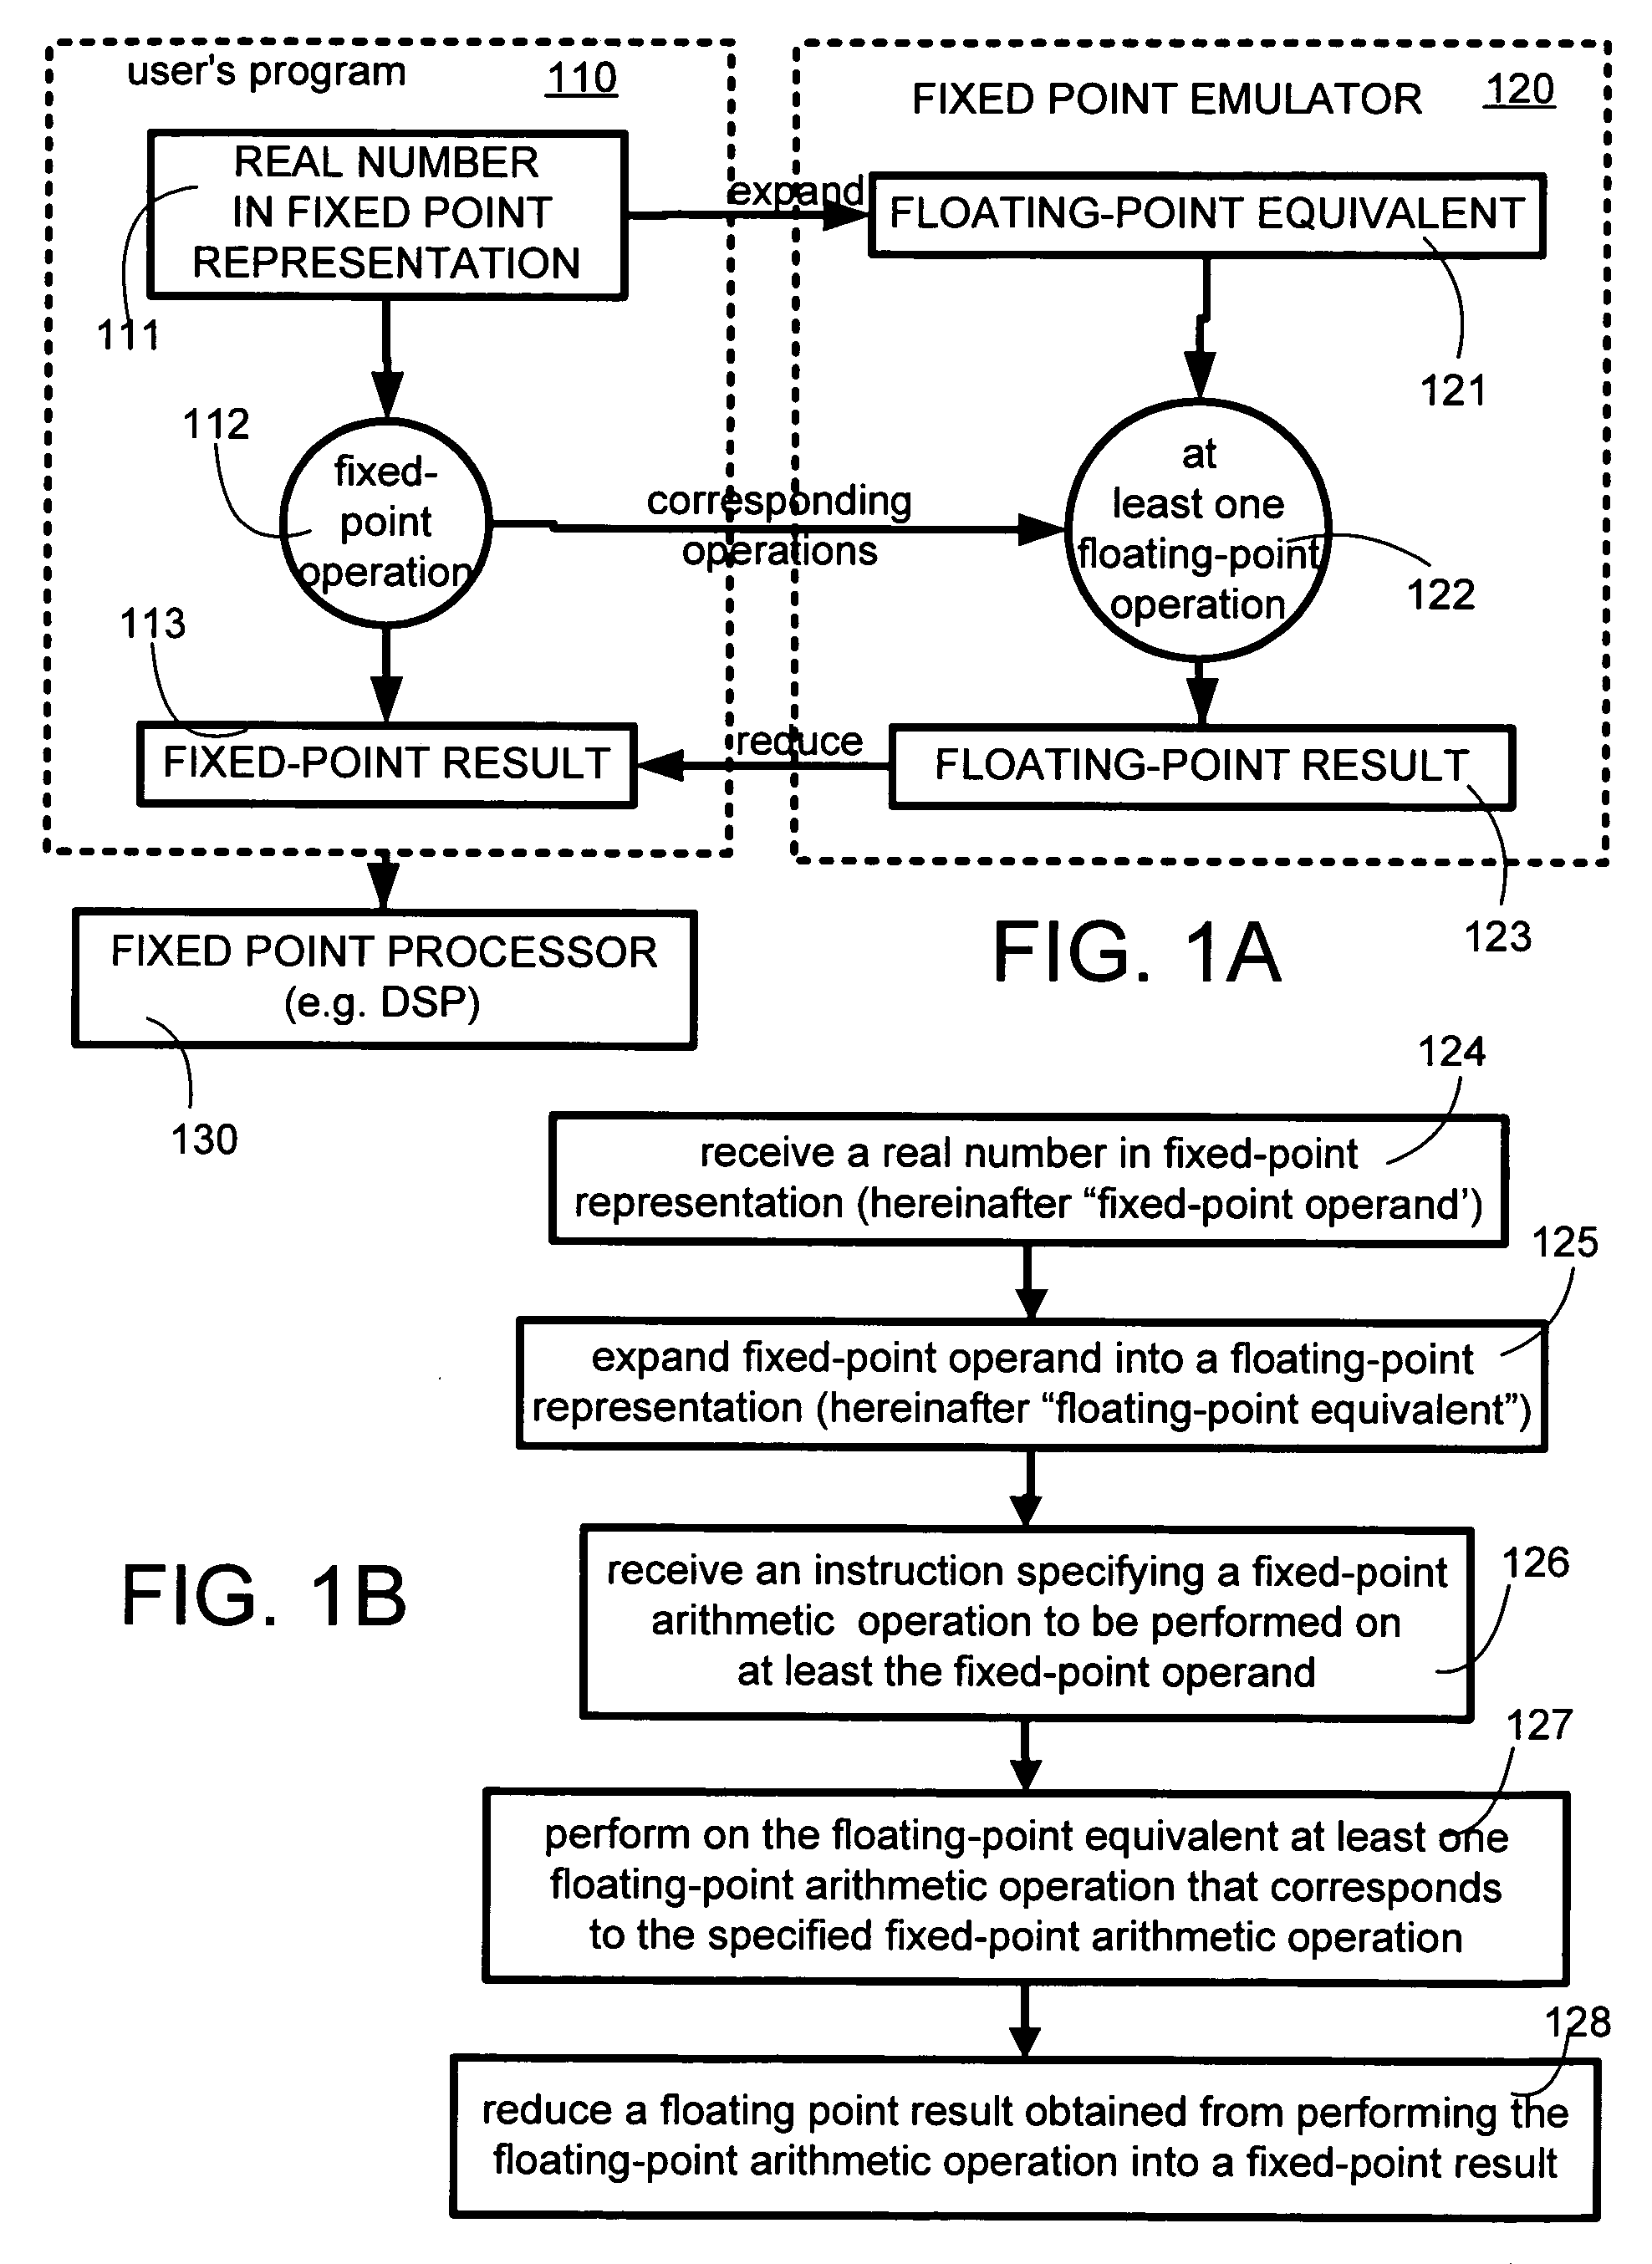 Emulation of a fixed point operation using a corresponding floating point operation